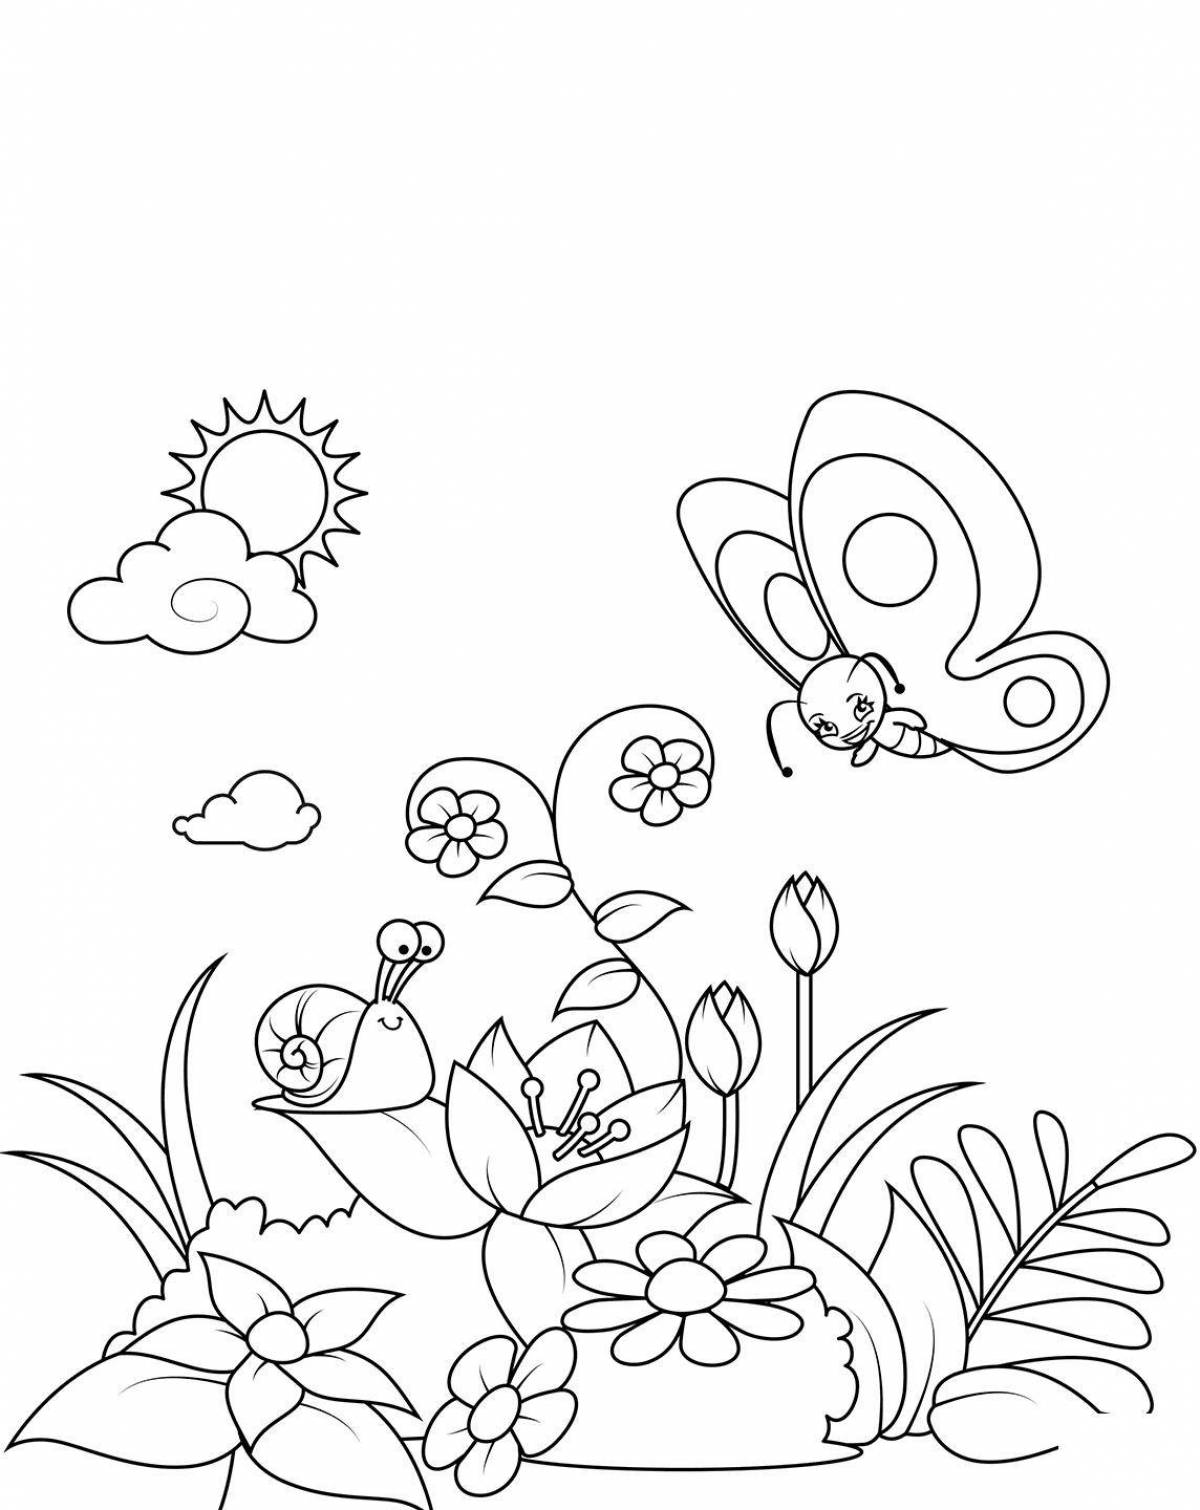 Joyful coloring with flowers